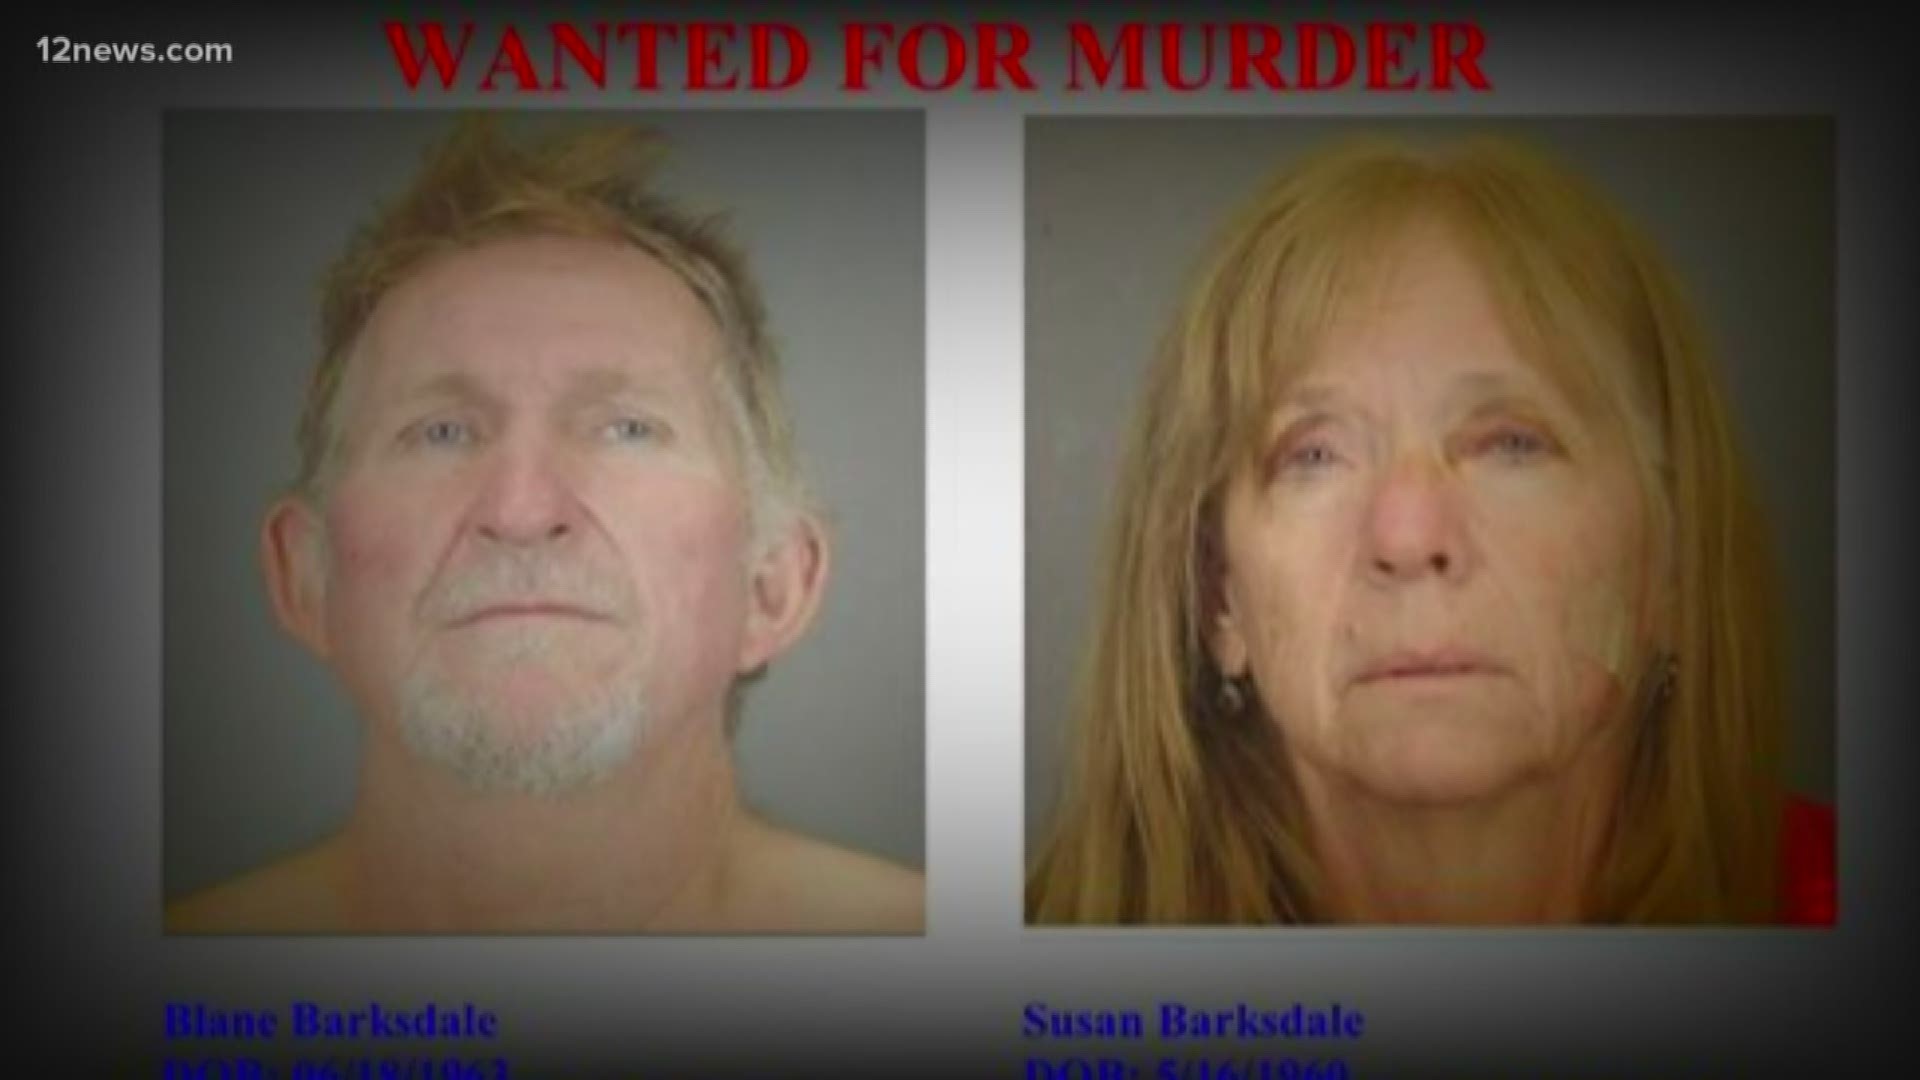 Officials with the U.S. Marshals held a press conference Monday updating the public on the case involving the husband and wife that escaped a prison transport on Aug. 26 and remain on the run.